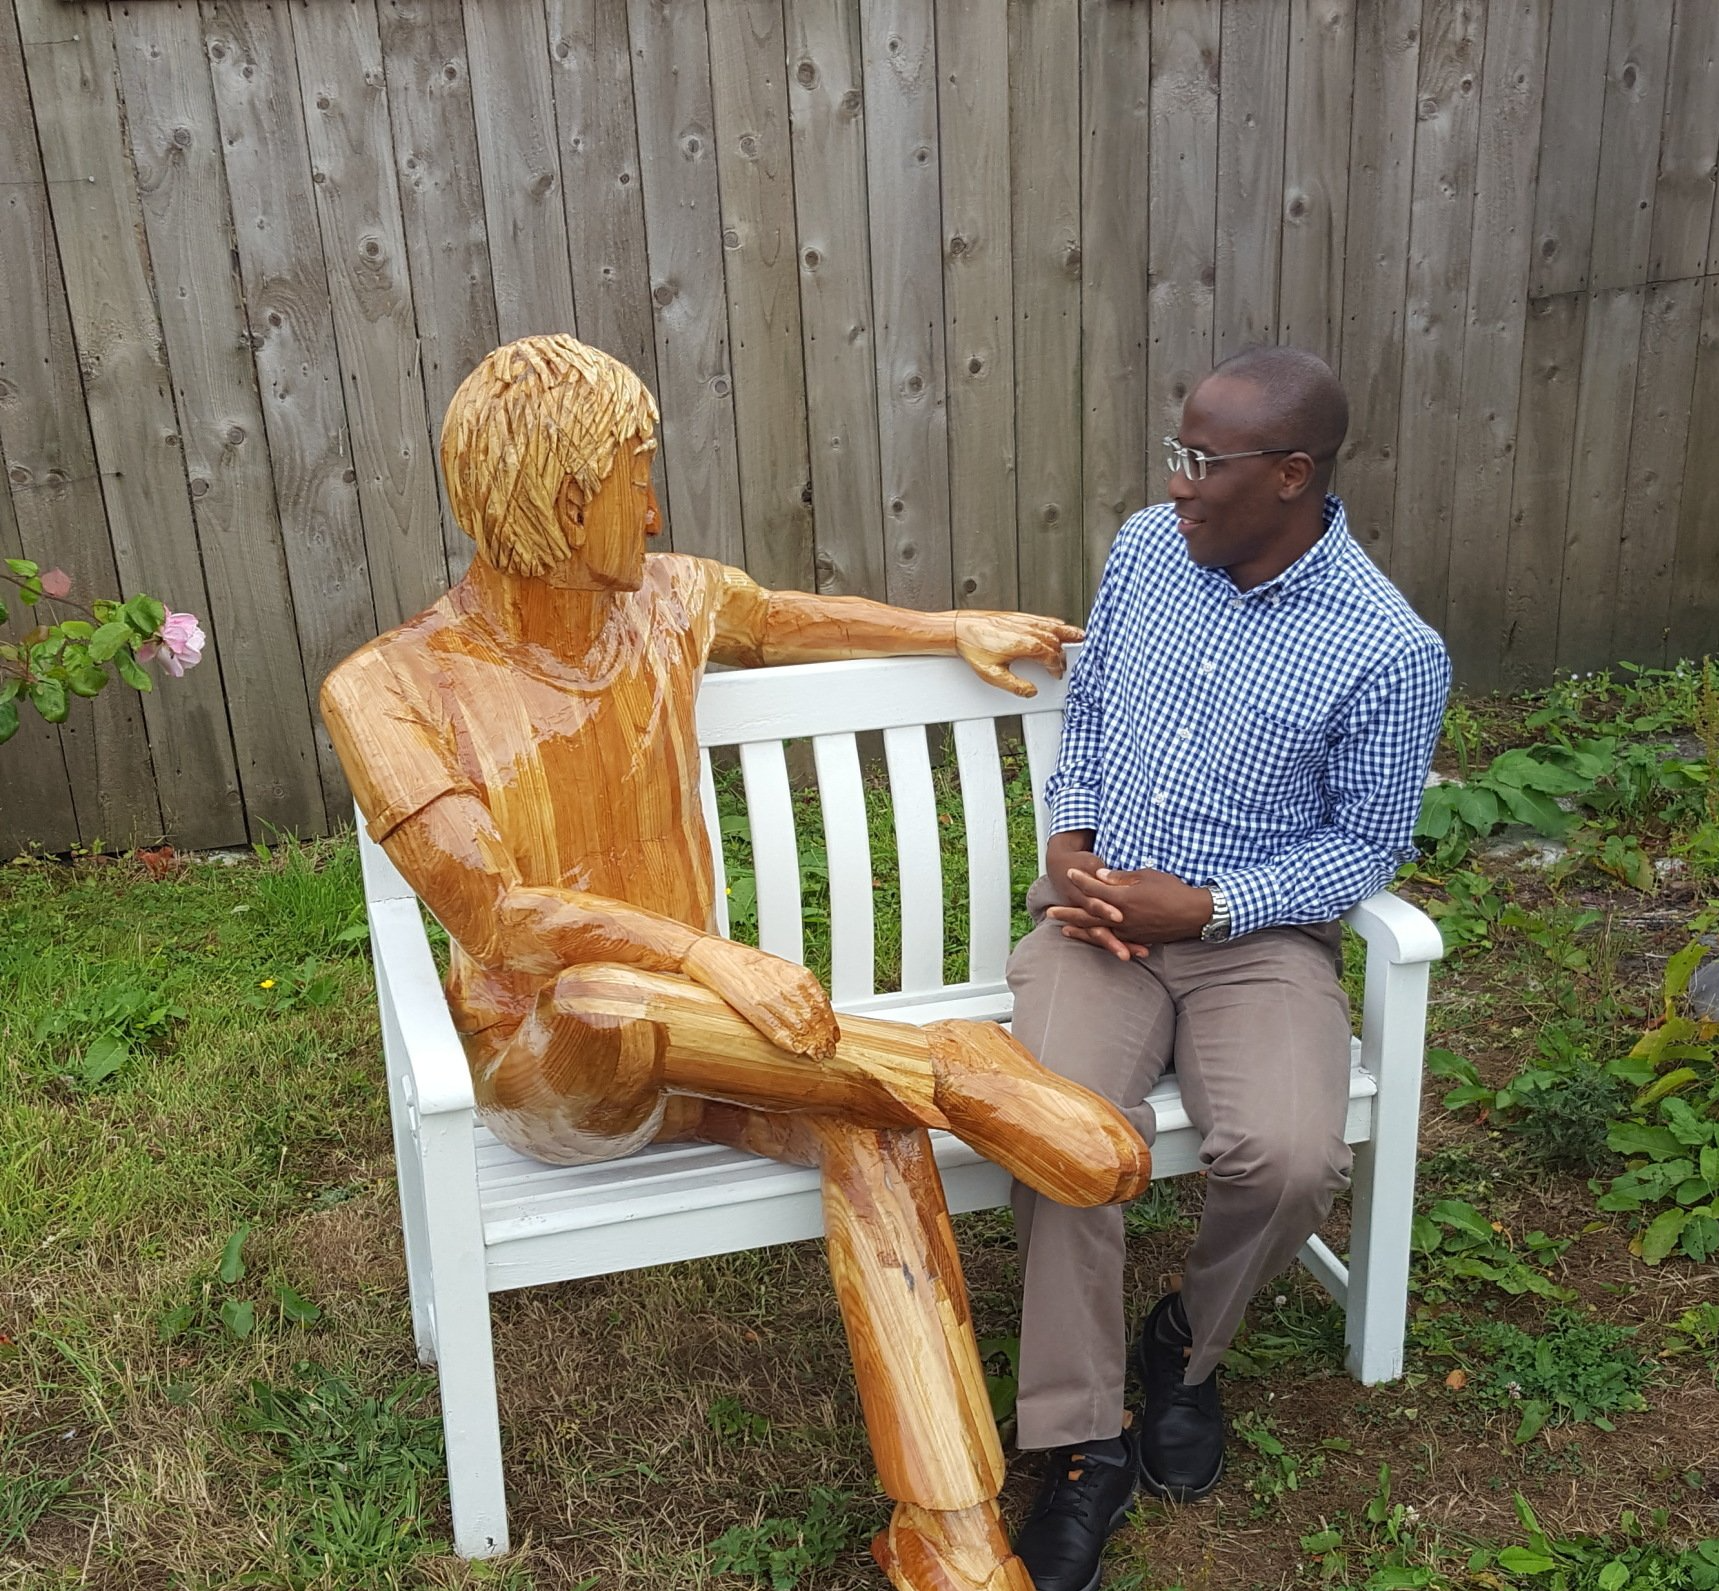 Life size wooden man sitting with a human man